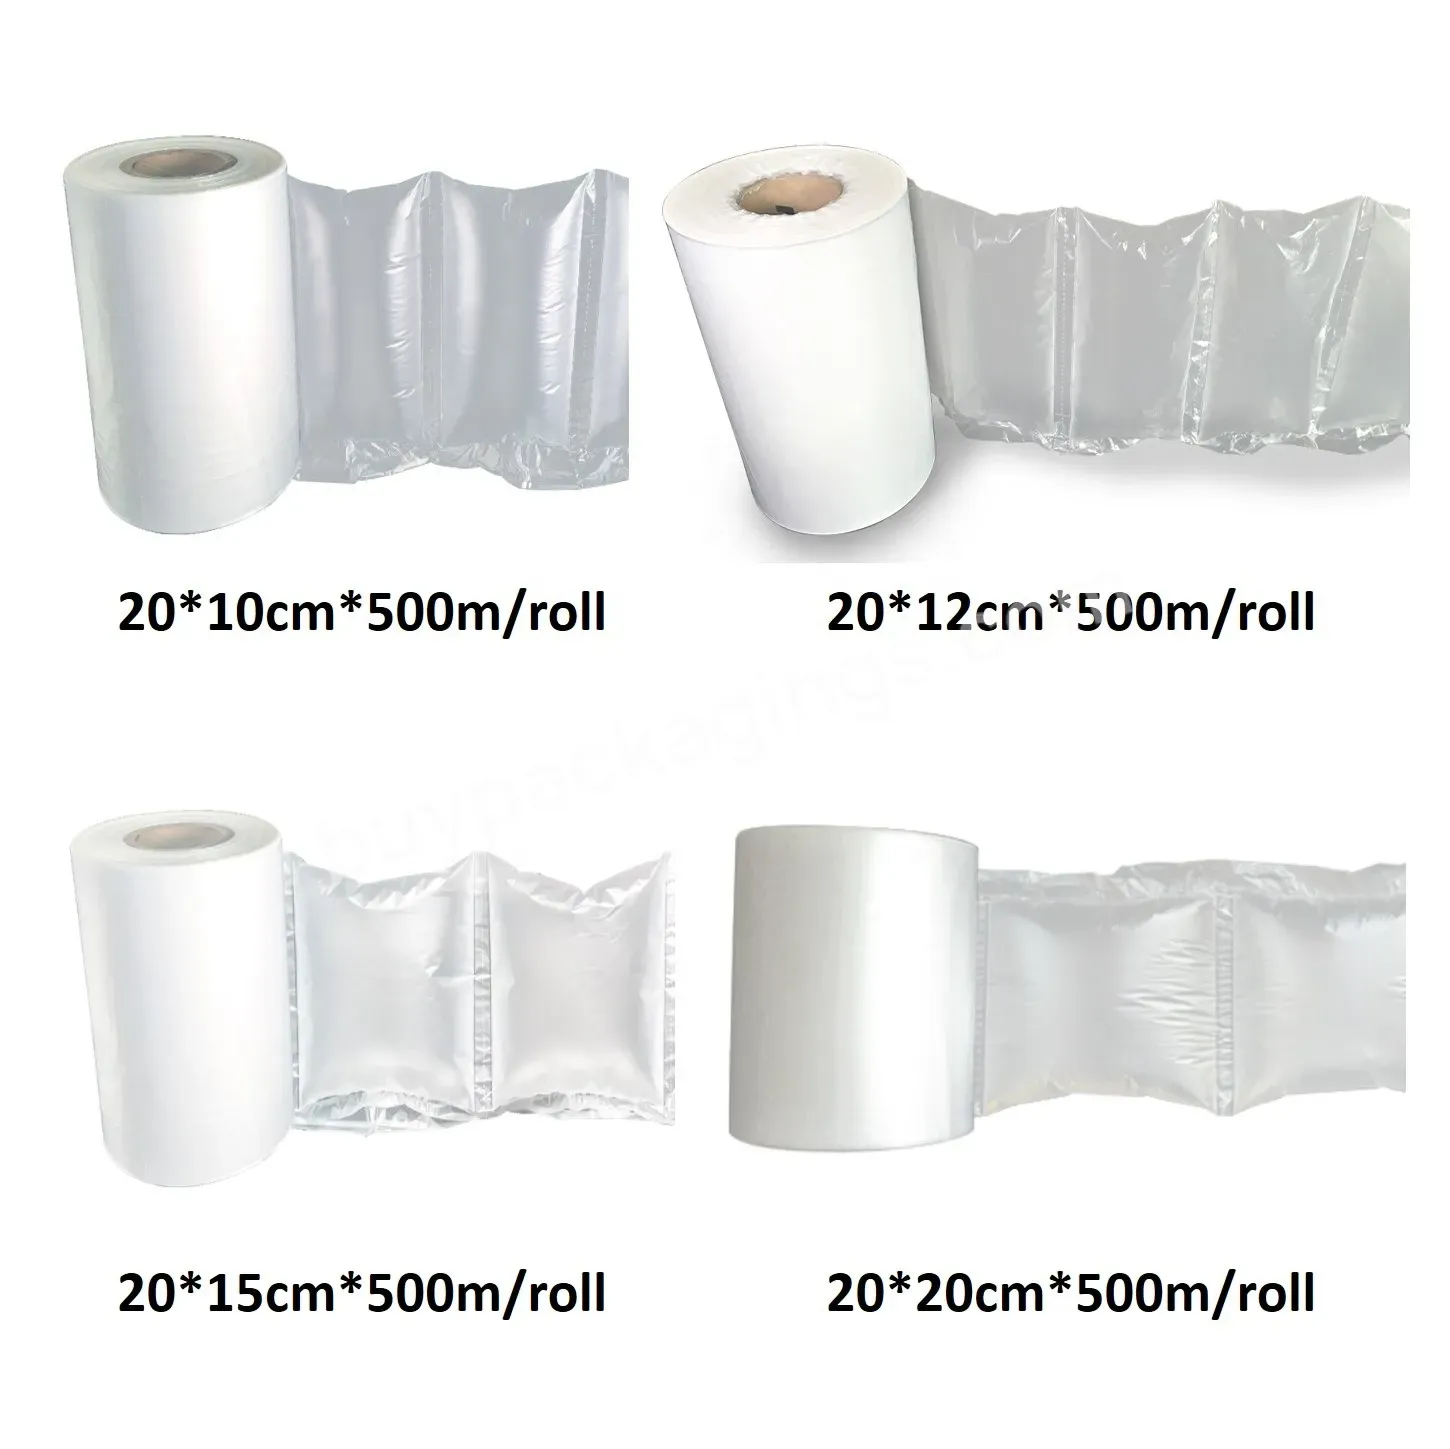 Inflatable Air Pillows Bags Void Fill Cushioning Packing Material 500 Meters A Roll